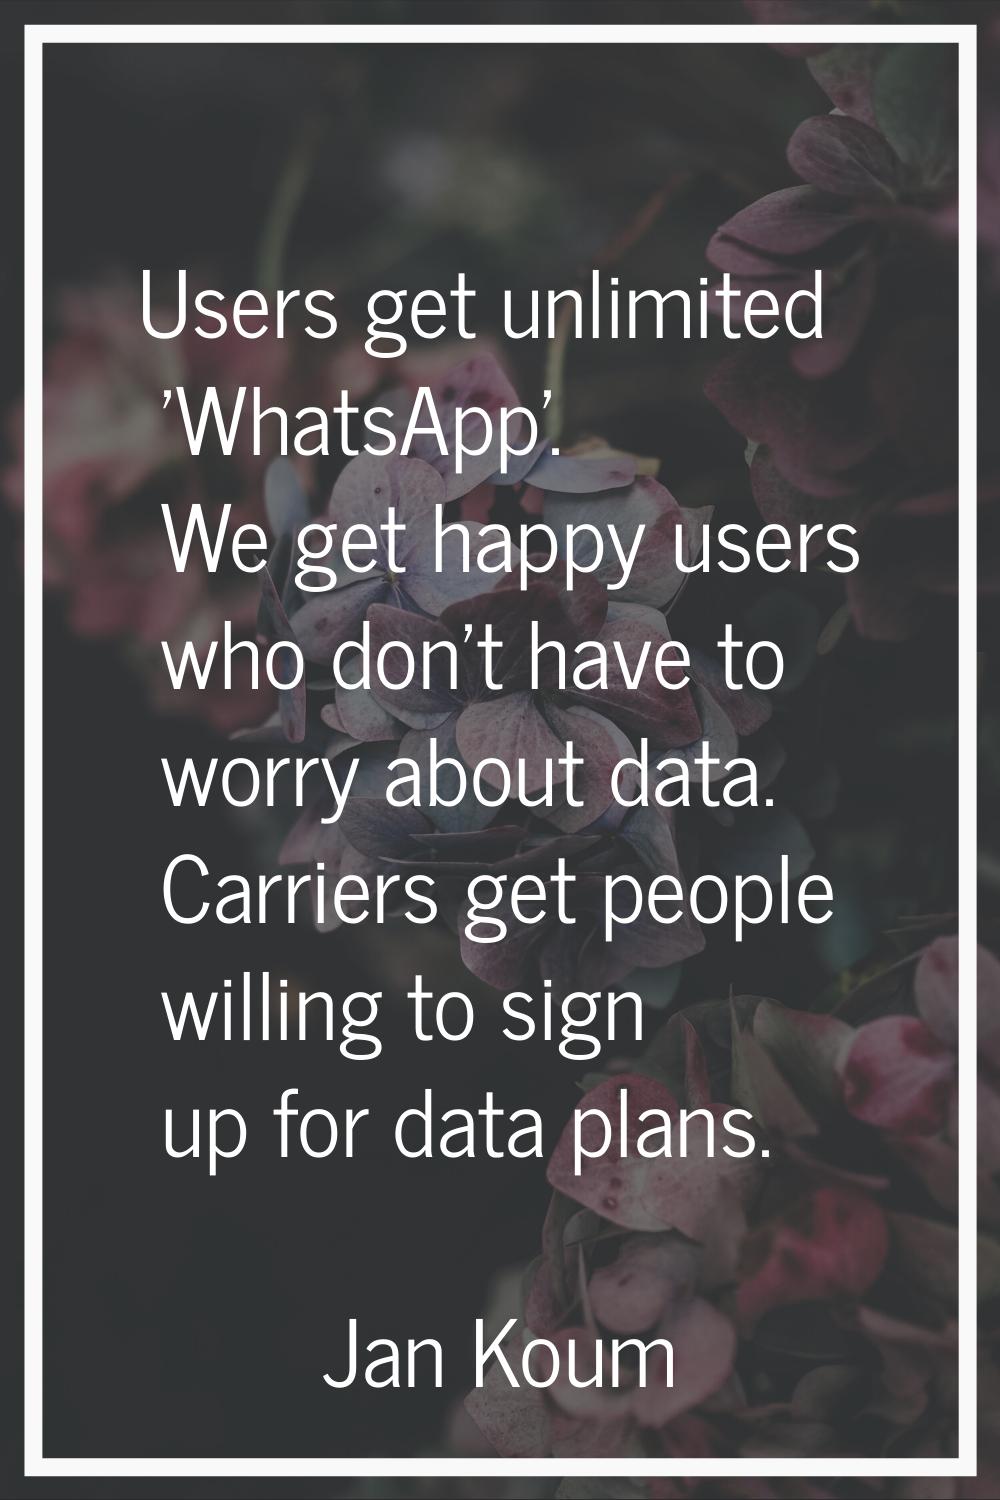 Users get unlimited 'WhatsApp'. We get happy users who don't have to worry about data. Carriers get